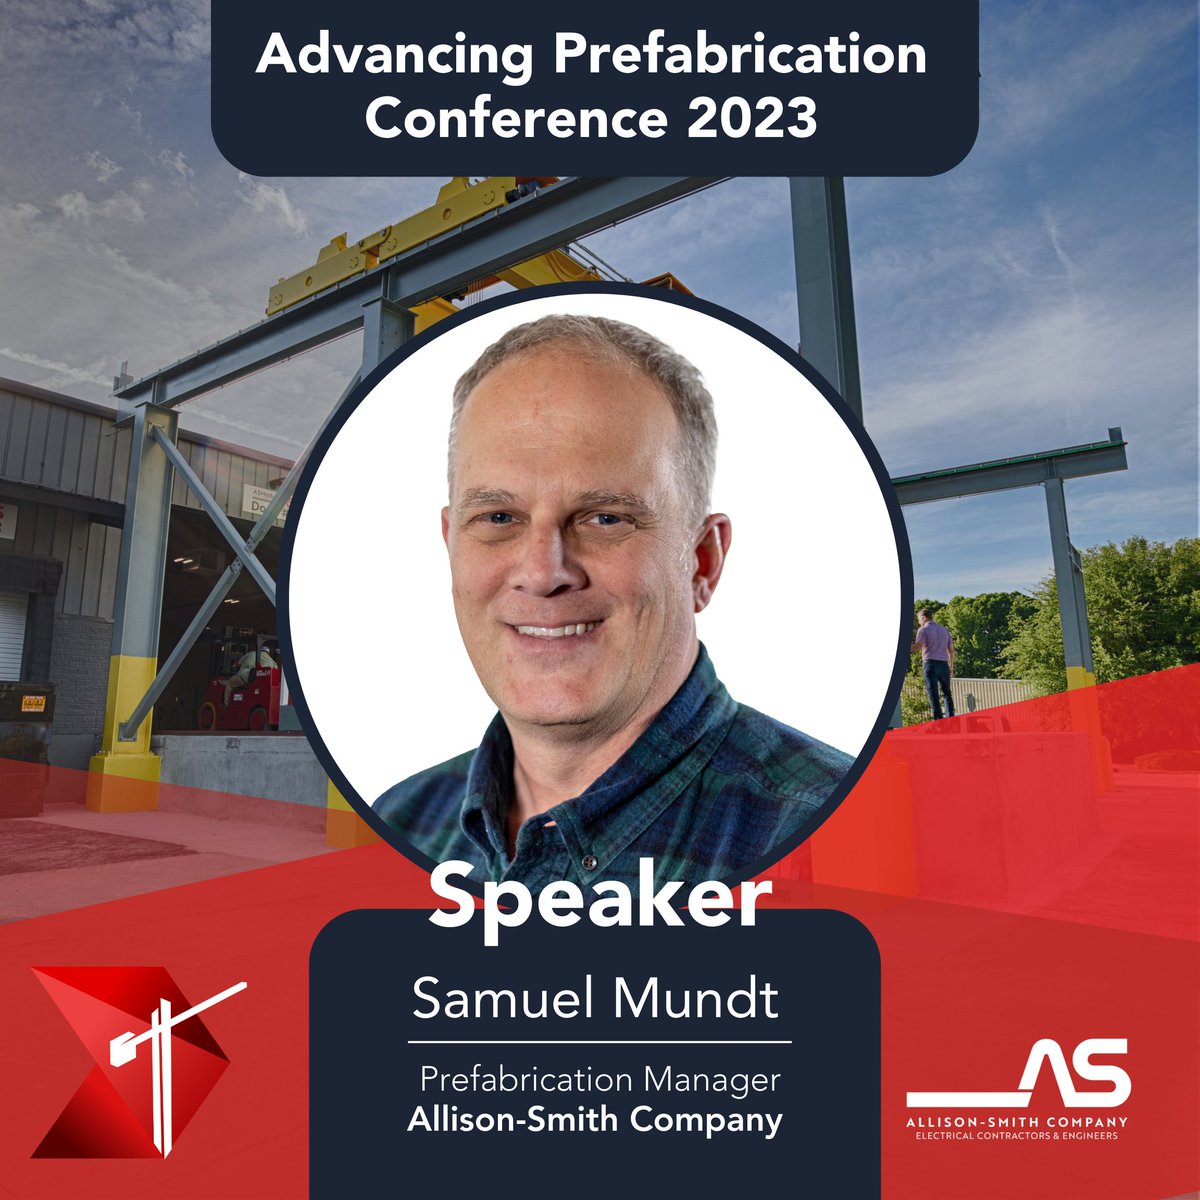 We're excited to announce that our very own Prefabrication Manager, Samuel Mundt, will be speaking at the upcoming Advancing Prefabrication Conference! Don't miss out on this great event! #Prefabrication #ModularSolutions #Innovation advancing-prefabrication.com